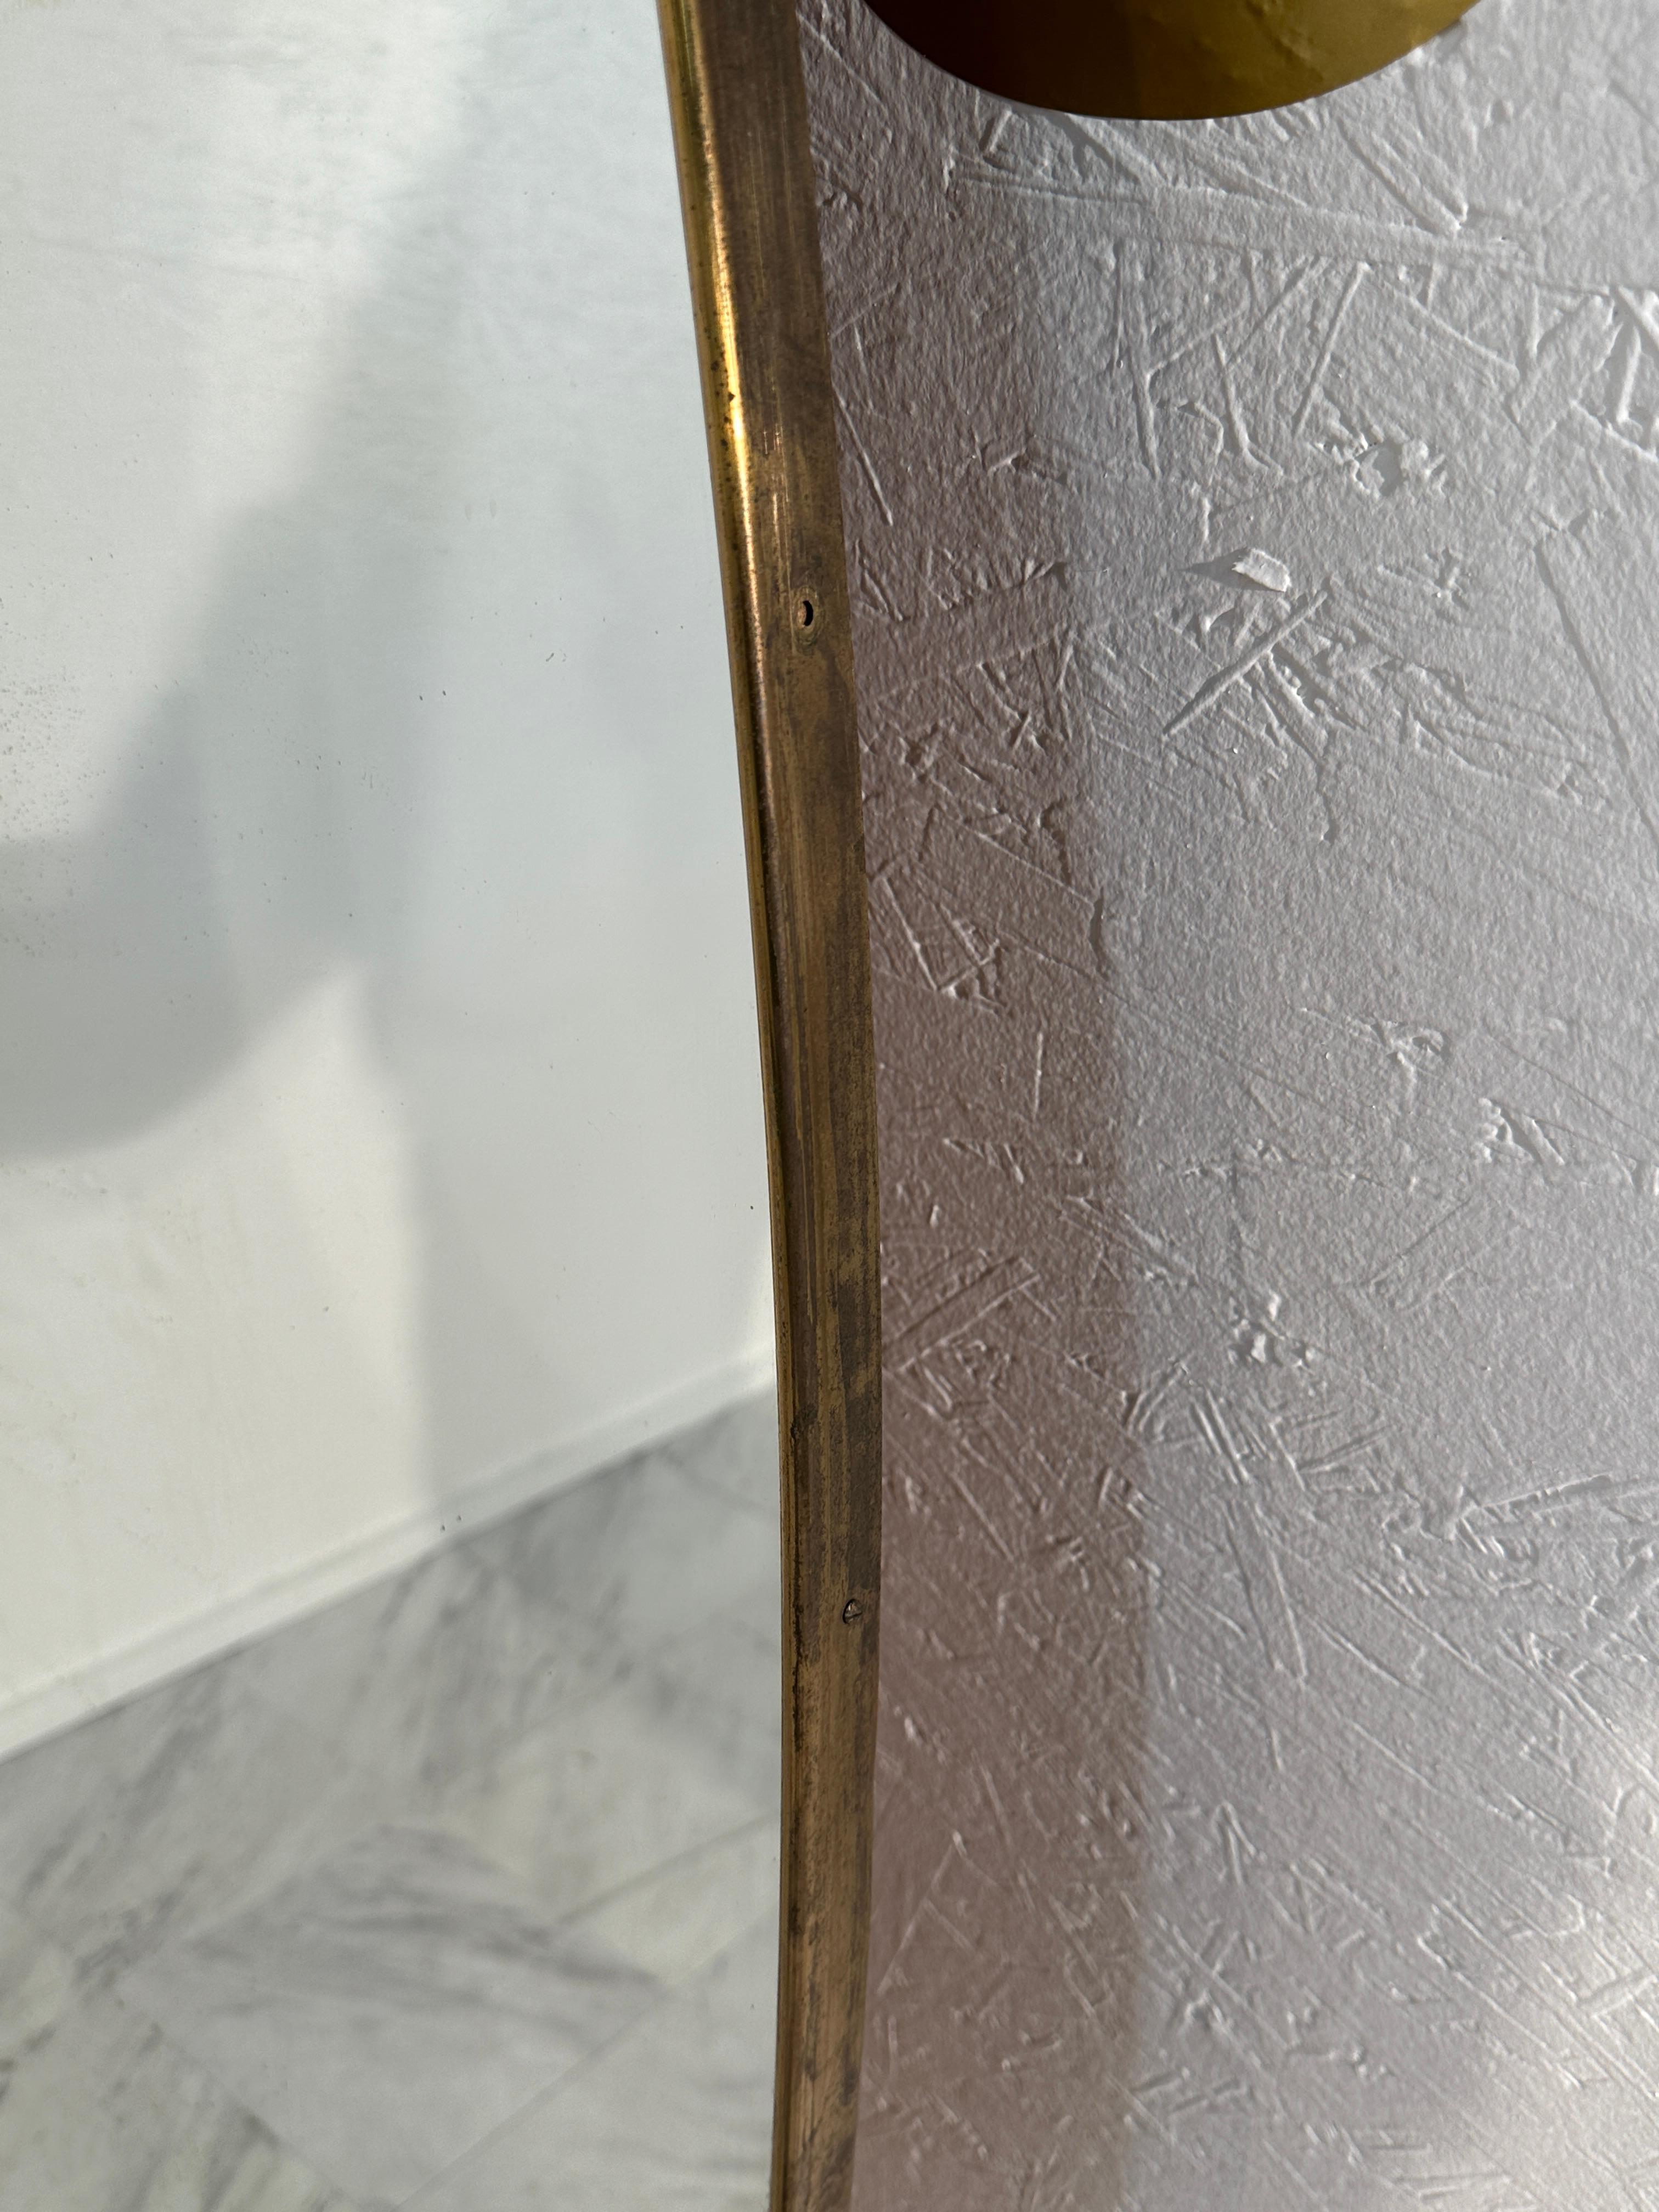 The Vintage Italian Oversize Oval Wall Mirror from the 1980s is a grand statement piece. Crafted in Italy, its generous size and sleek oval shape command attention. With a sophisticated design that epitomizes 1980s Italian aesthetic, it features a